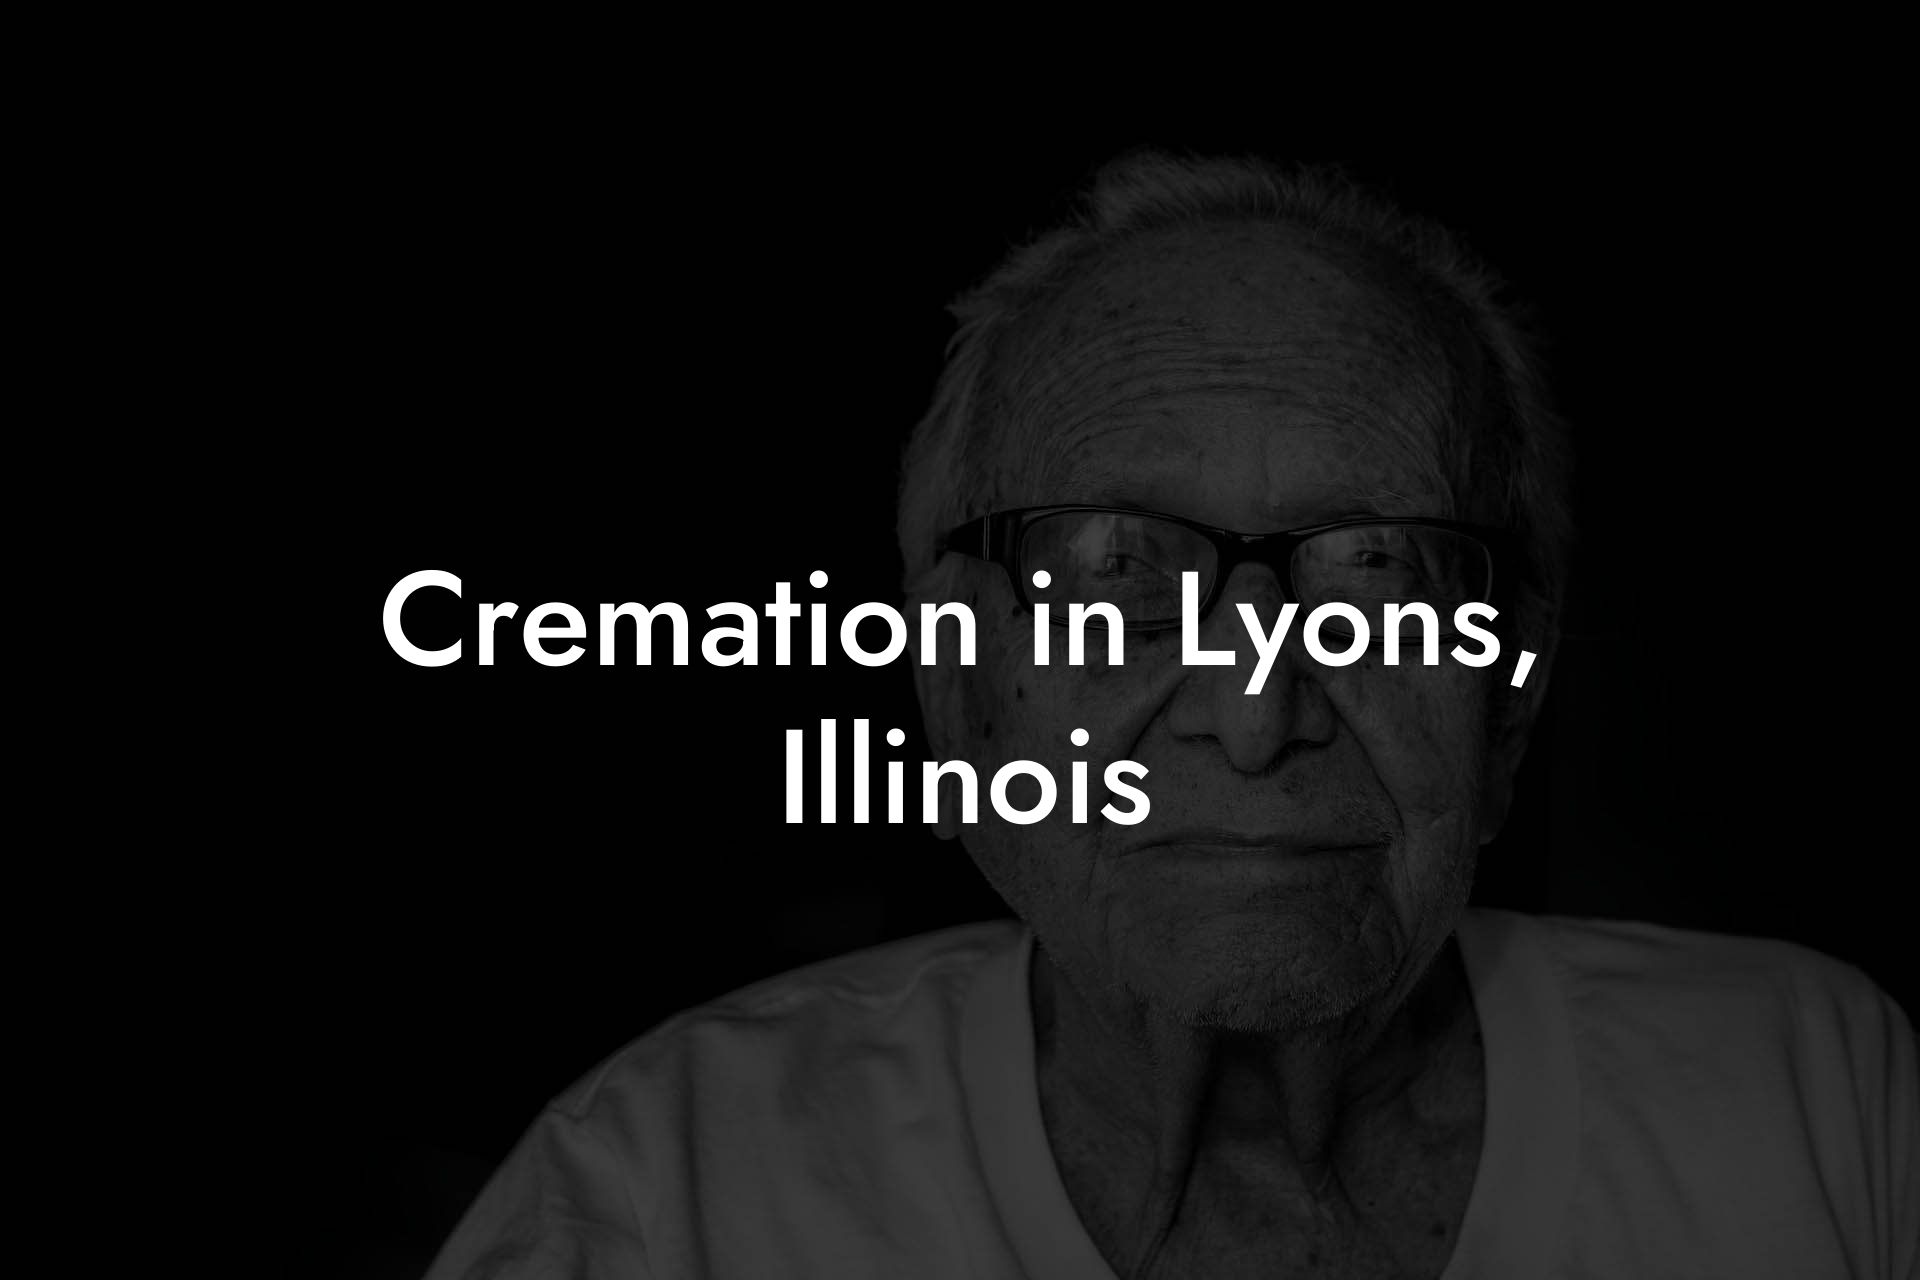 Cremation in Lyons, Illinois